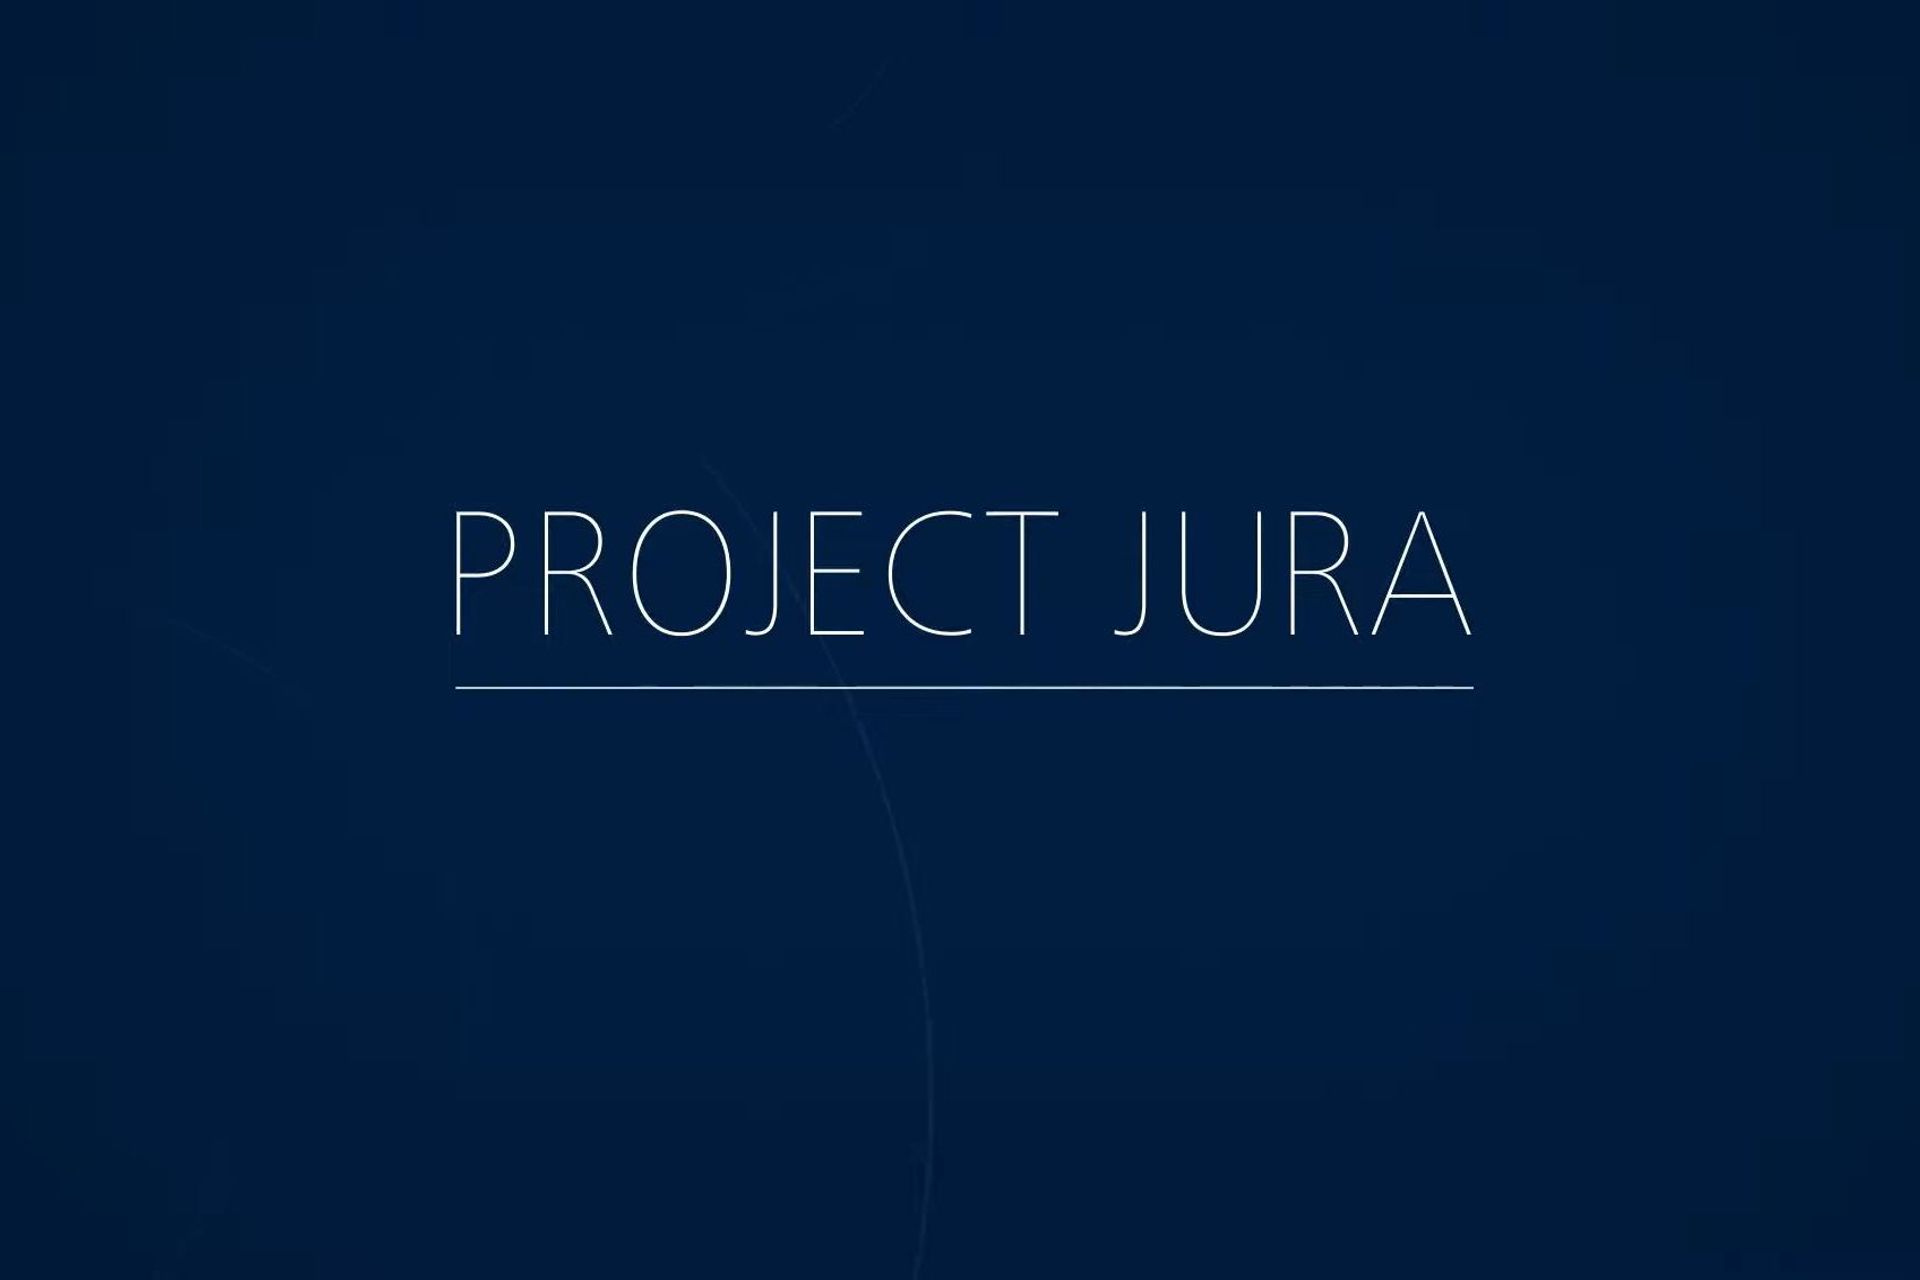 The "Project Jura" logo implemented by the Swiss National Bank, the Banque de France and the BIS Innovation Hub